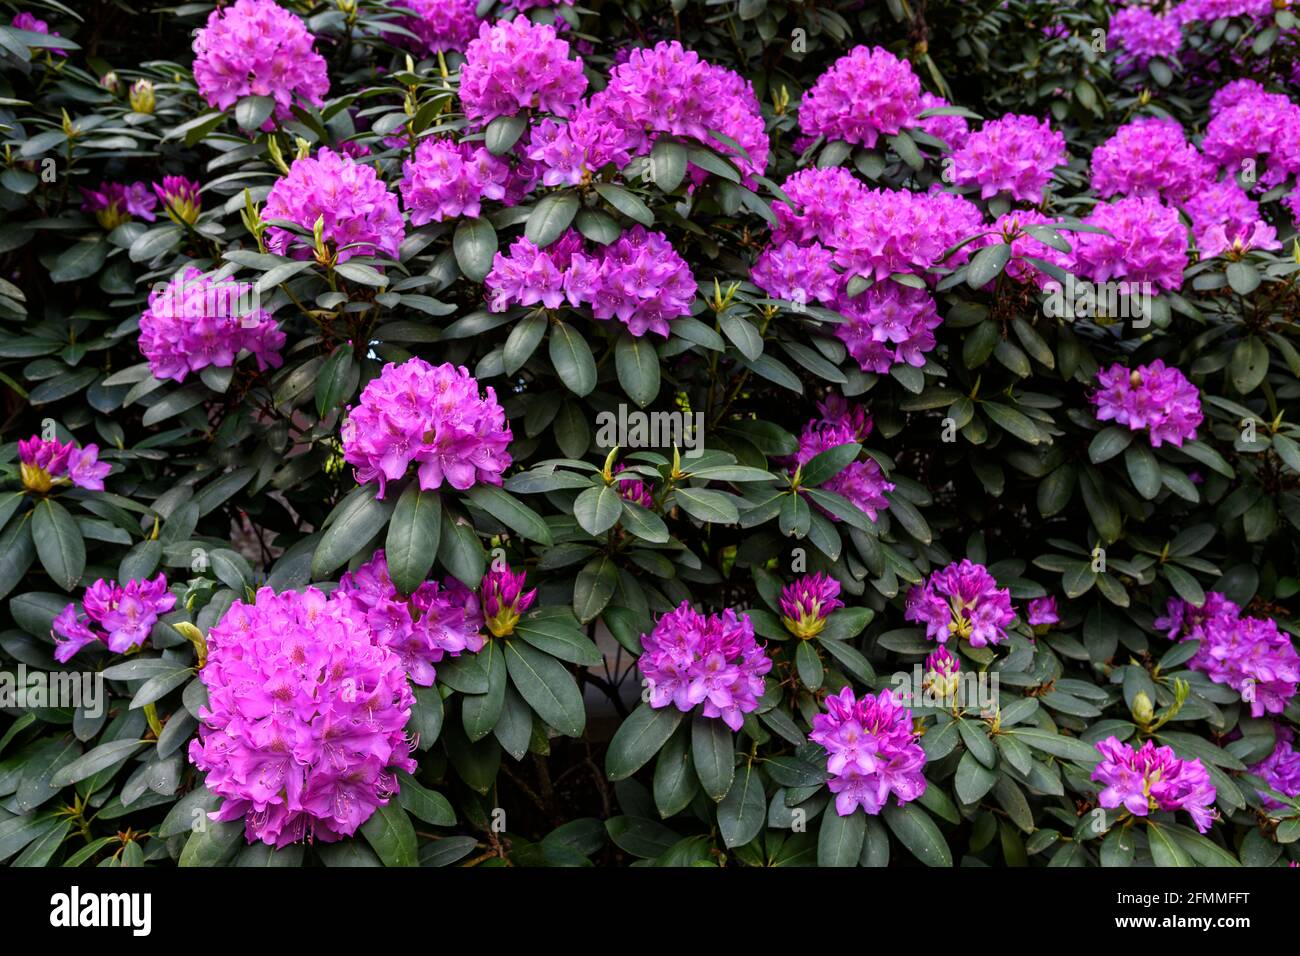 Rhodendron bush in full bloom, Great Smoky Mountains National Park, North Carolina Stock Photo